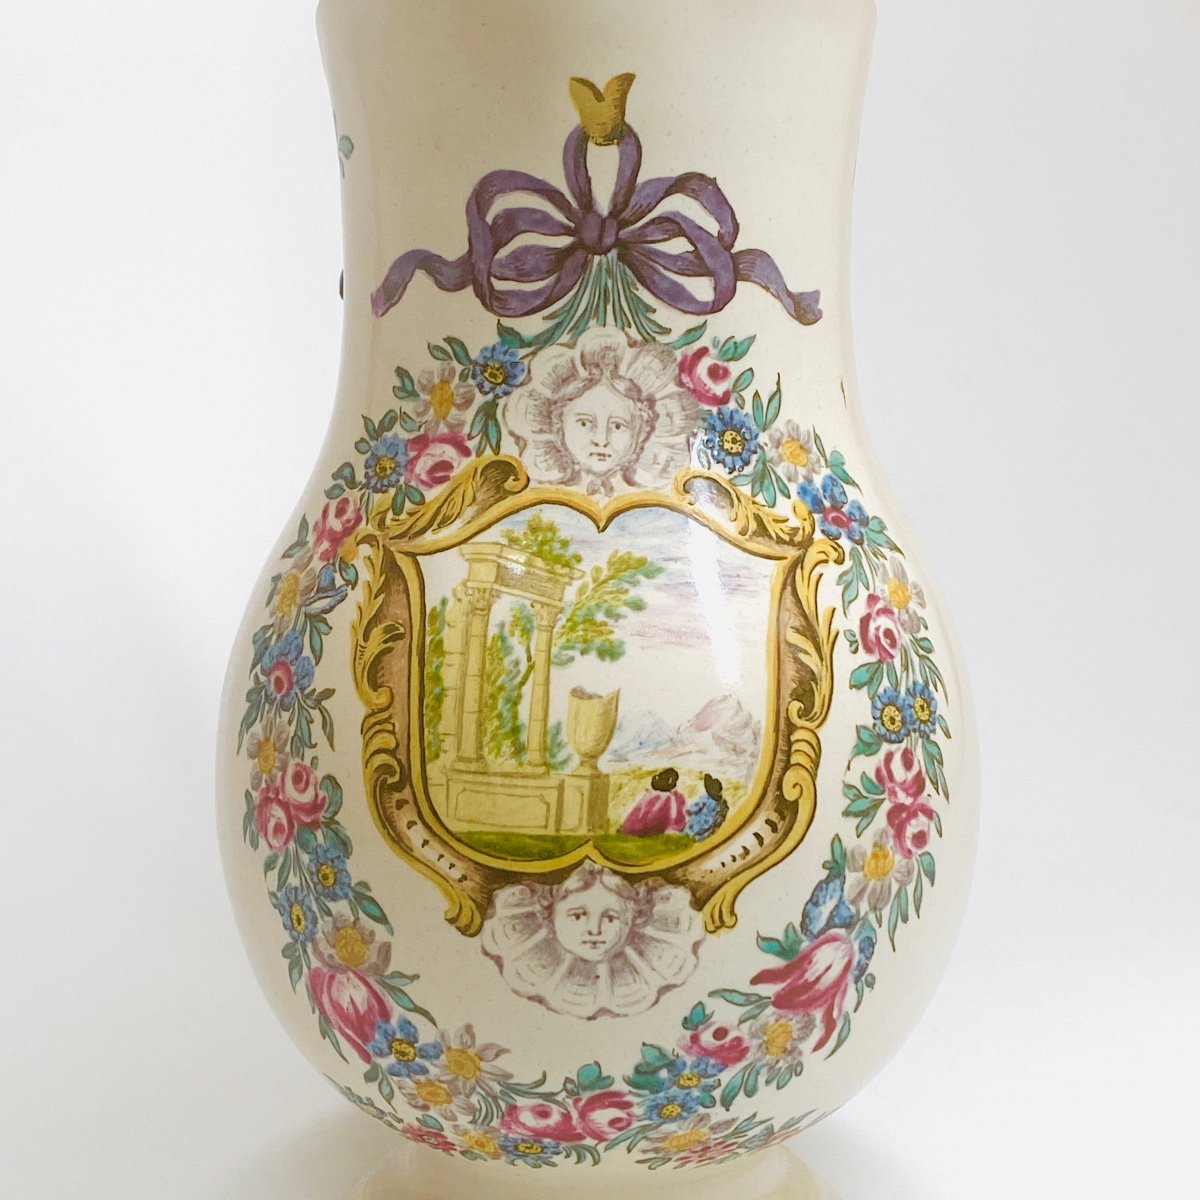 Meillonnas Or Sceaux? Ewer Attributed To The Painter Protais Pidoux - Eighteenth Century-photo-1